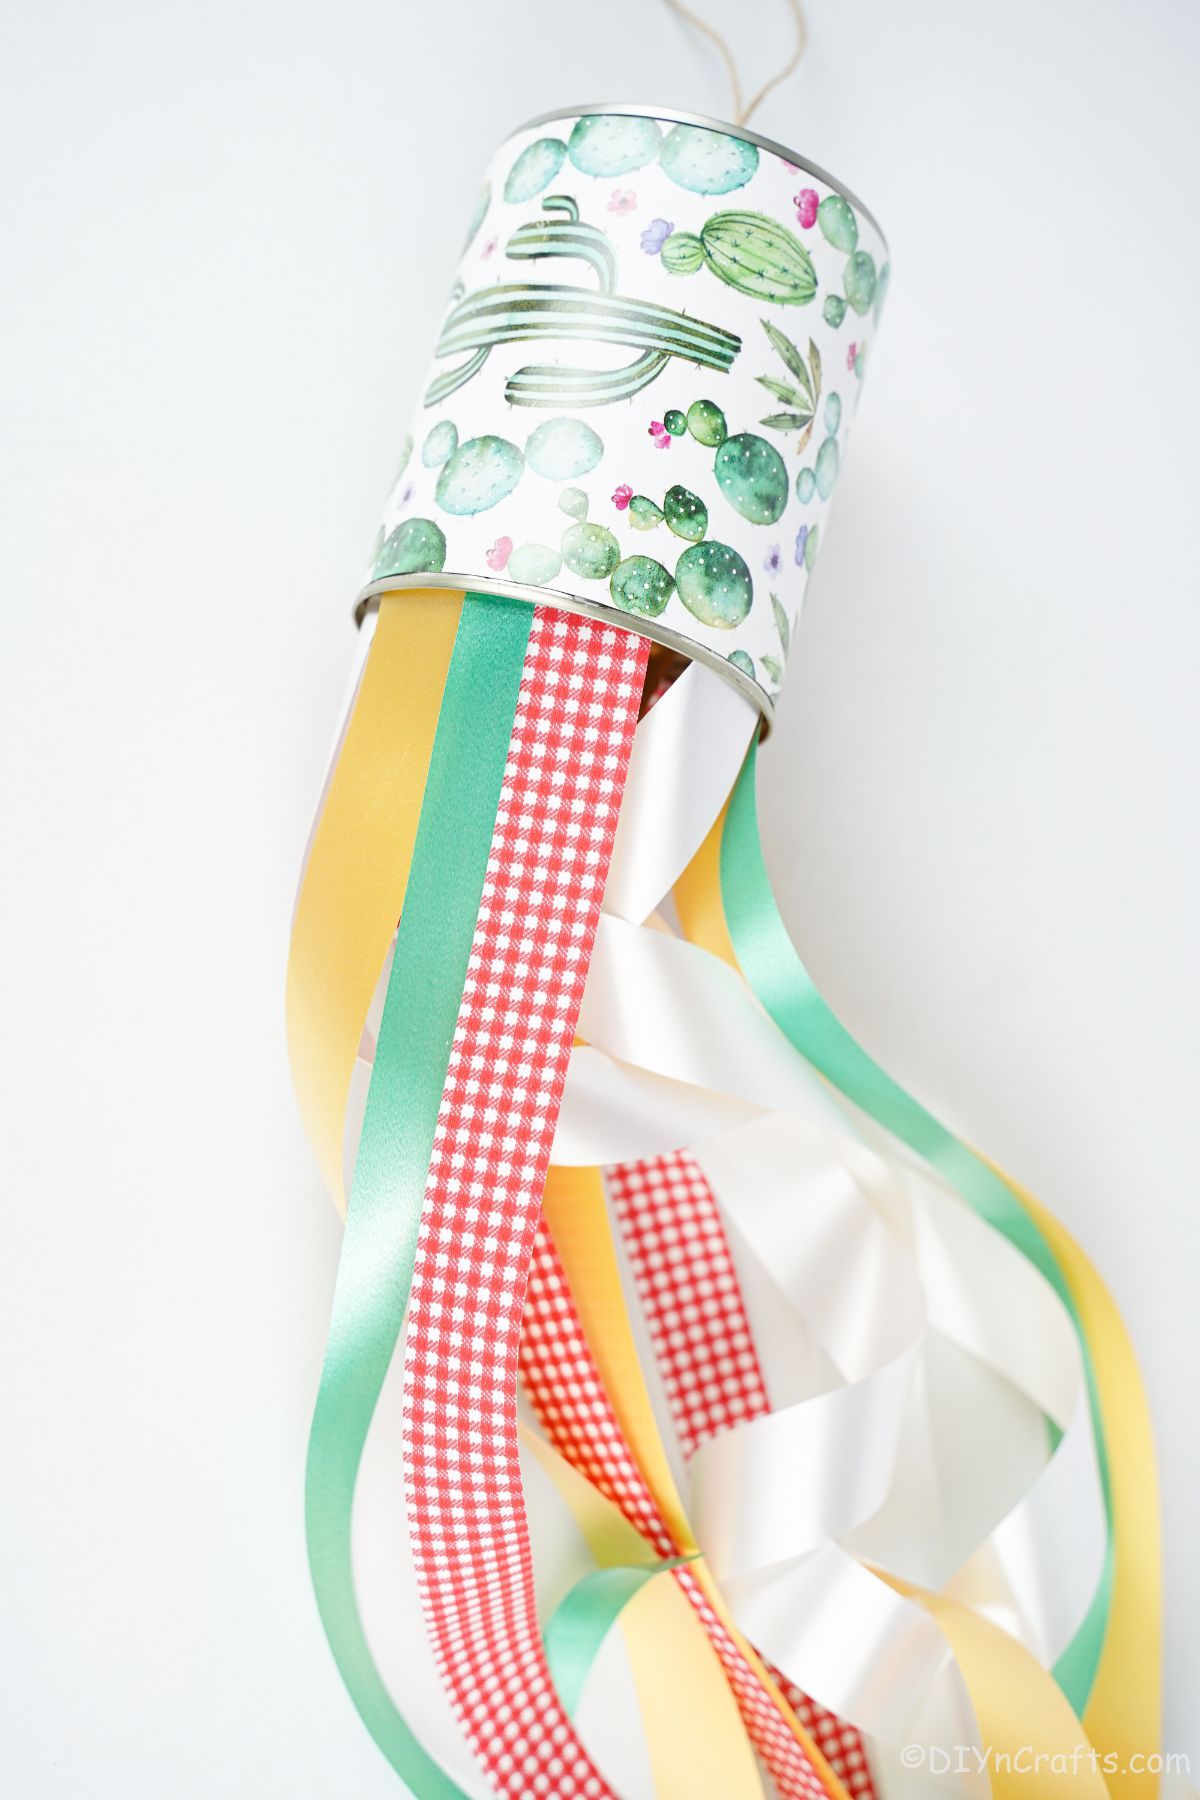 tin windsock on the table with colored ribbons